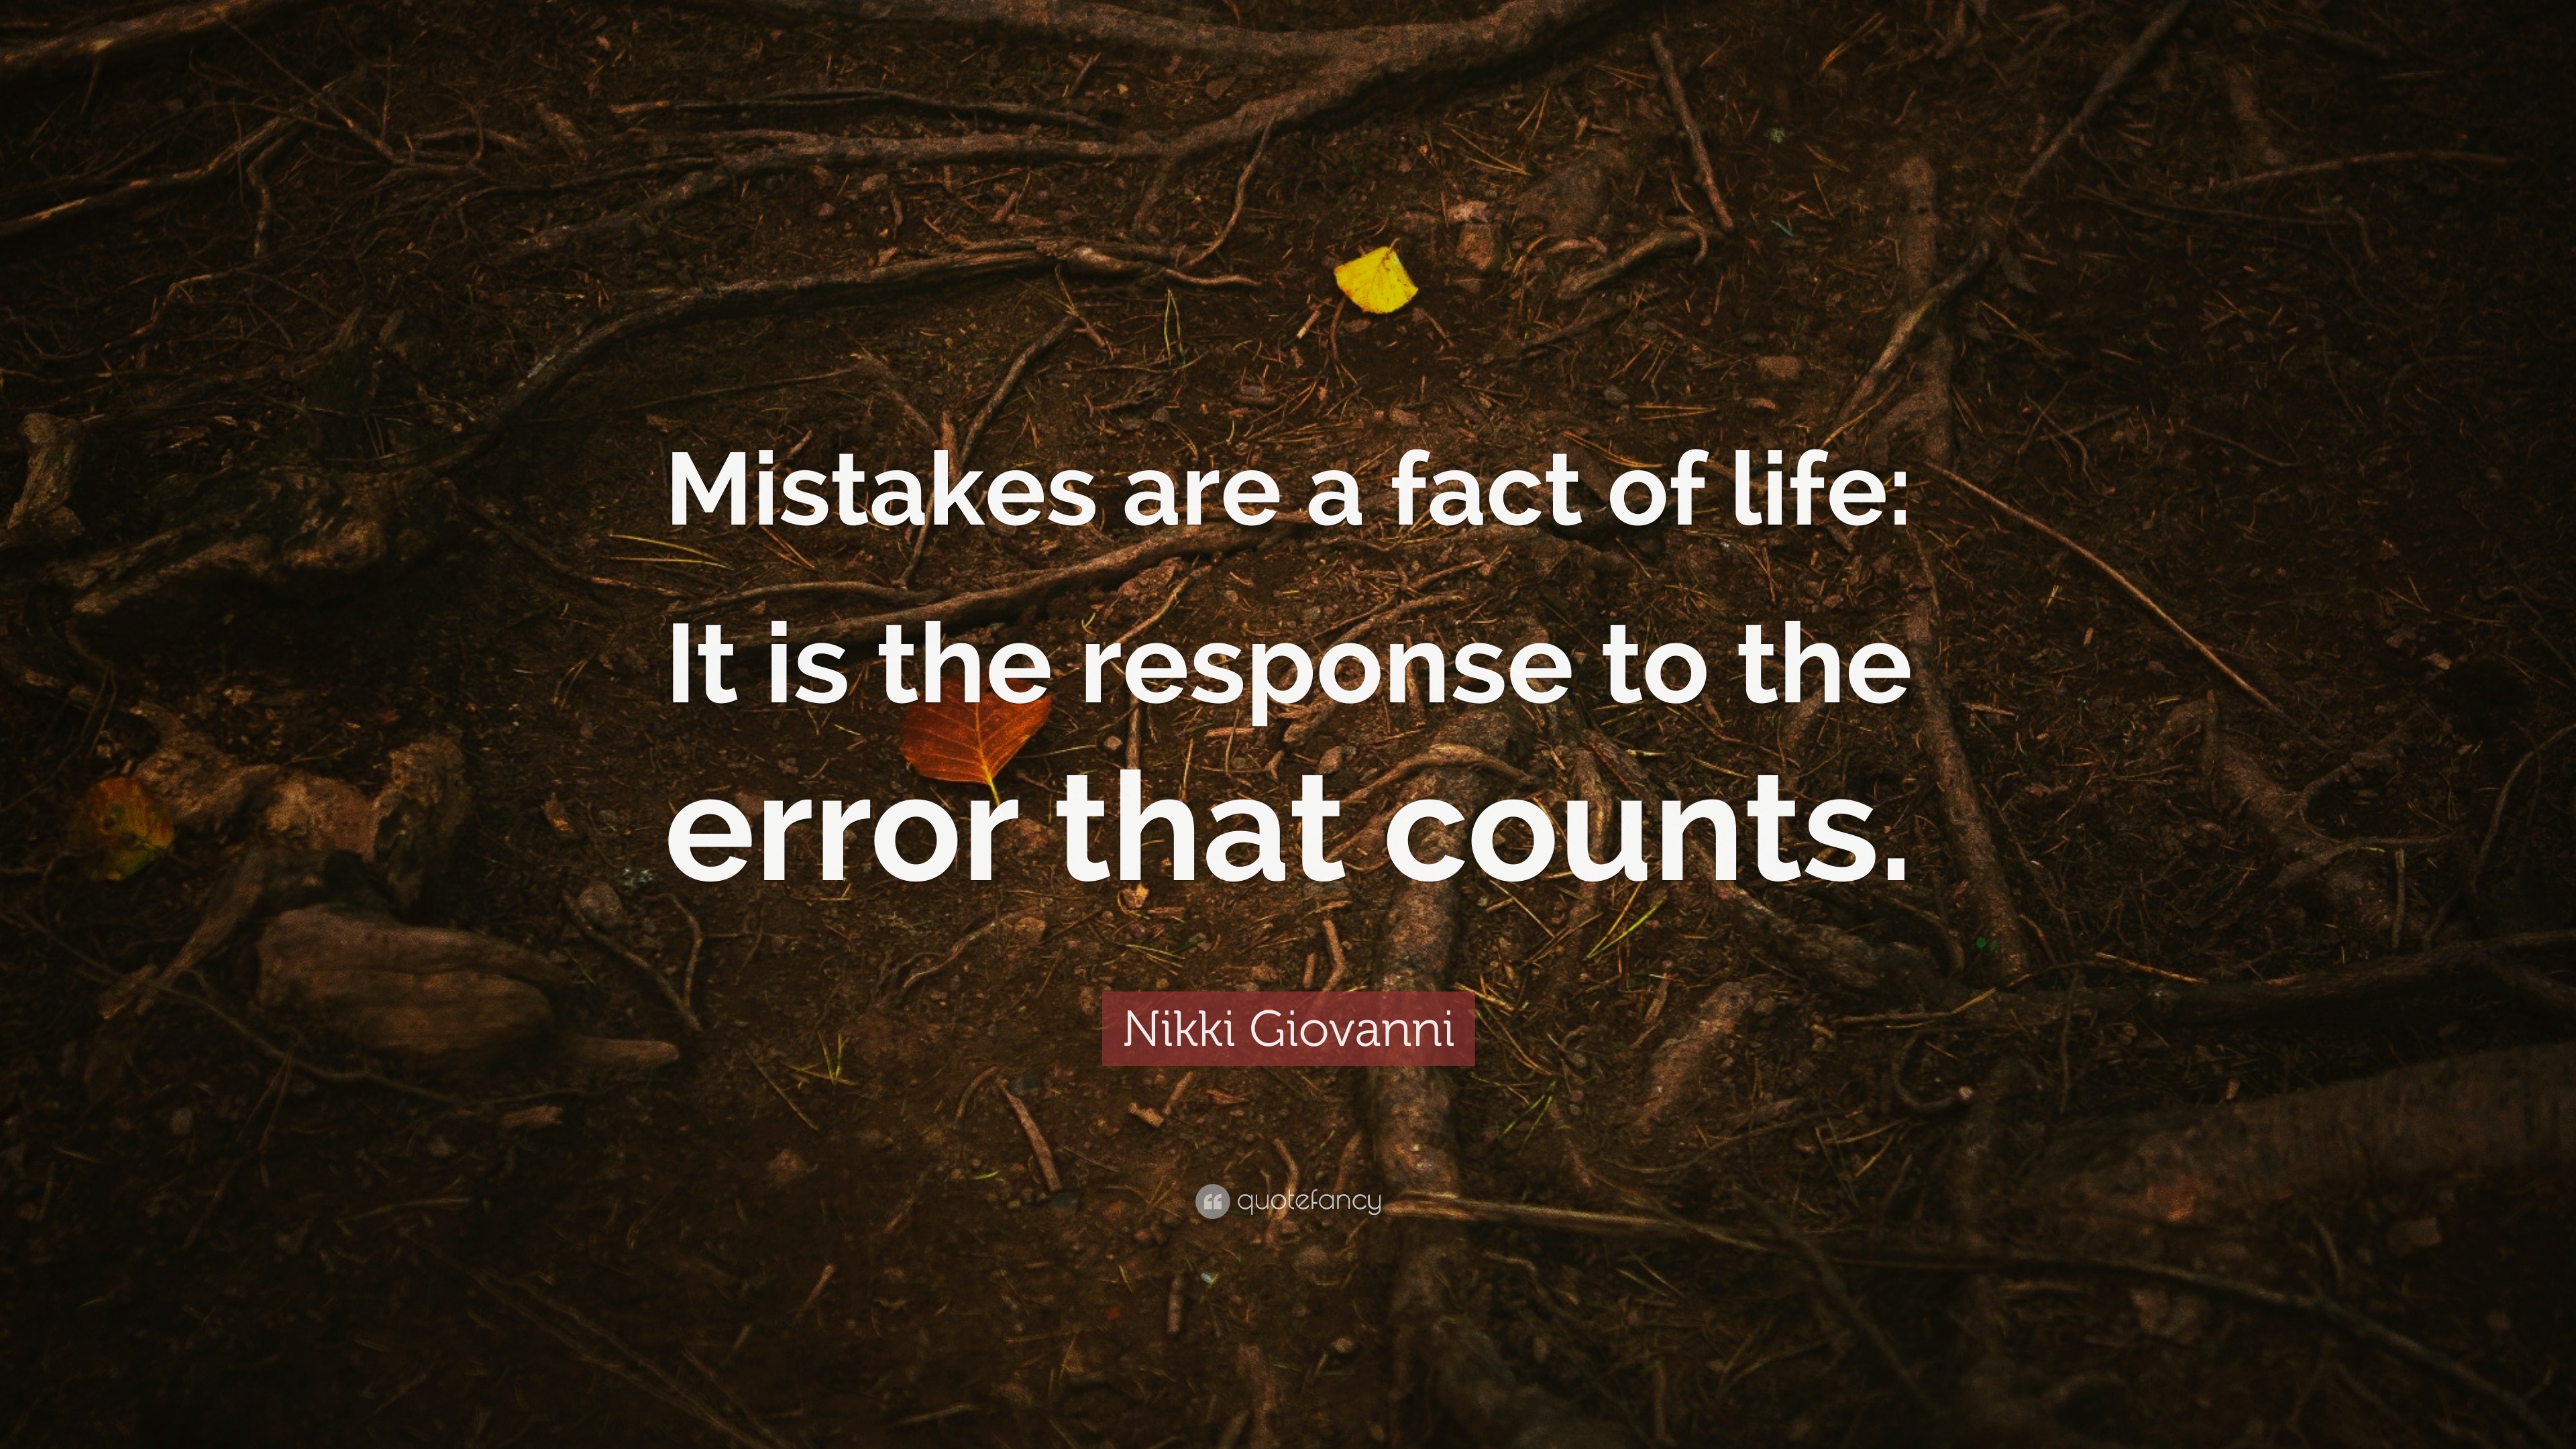 Nikki Giovanni Quote Mistakes Are A Fact Of Life It Is The Response To The Error That Counts 12 Wallpapers Quotefancy